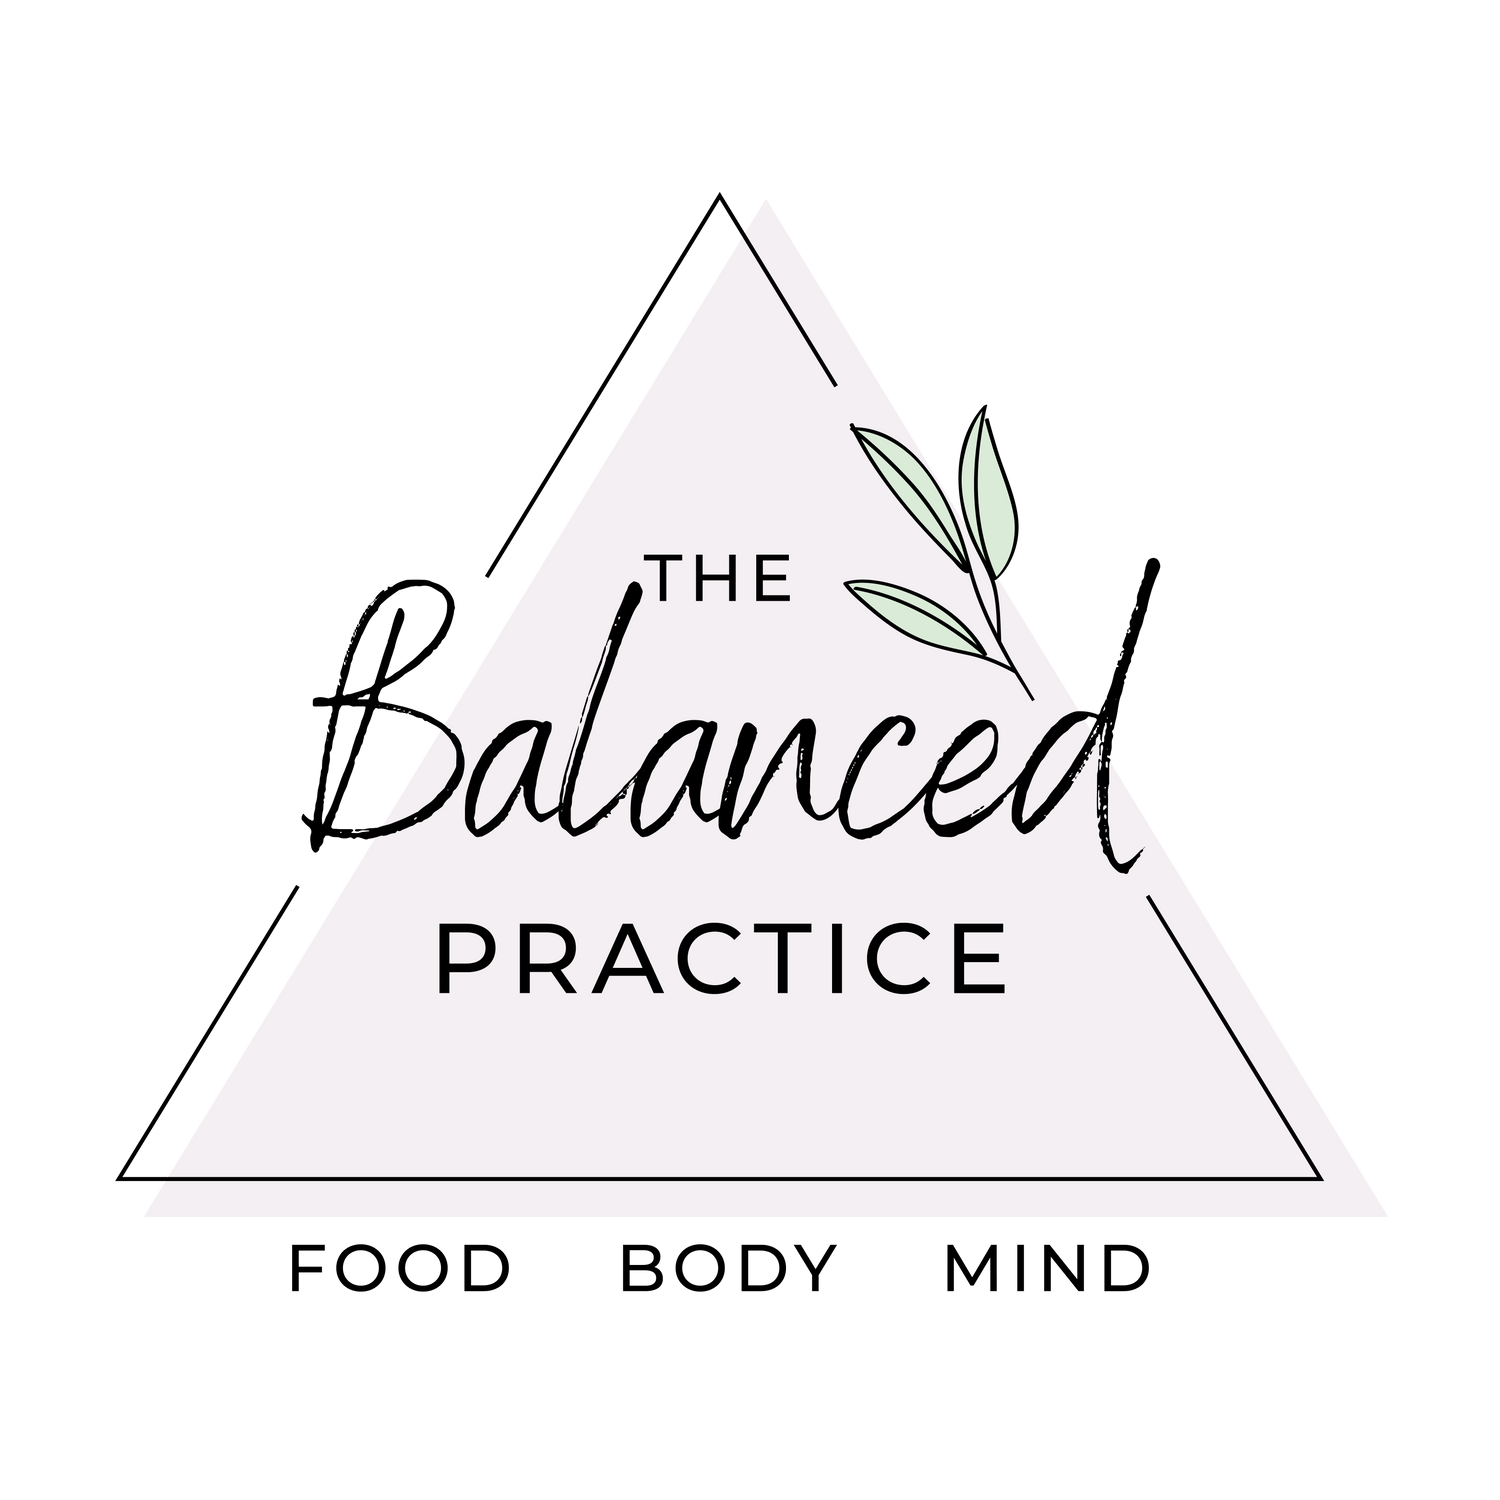 Gallery Photo of The Balanced Practice
